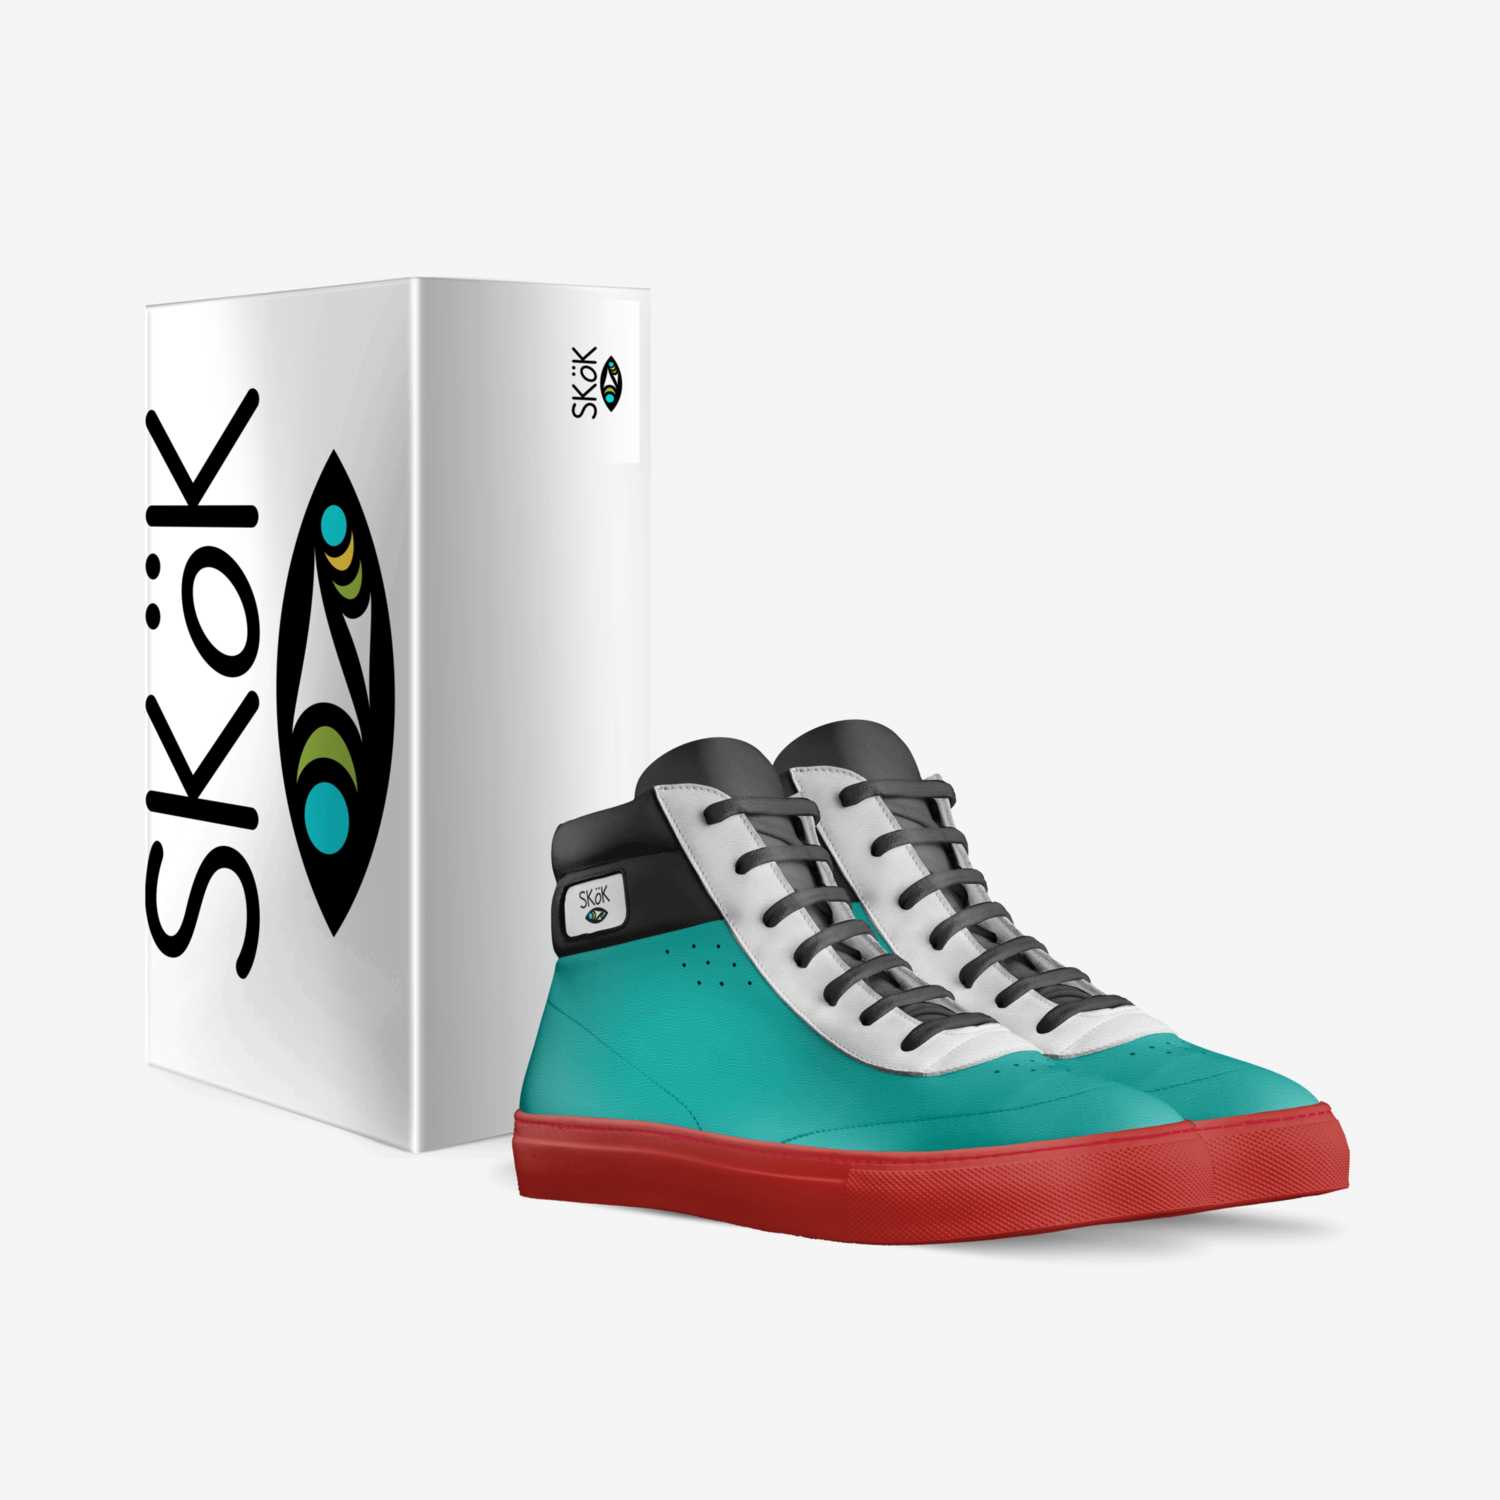 SKöK zac george custom made in Italy shoes by Zachary George | Box view